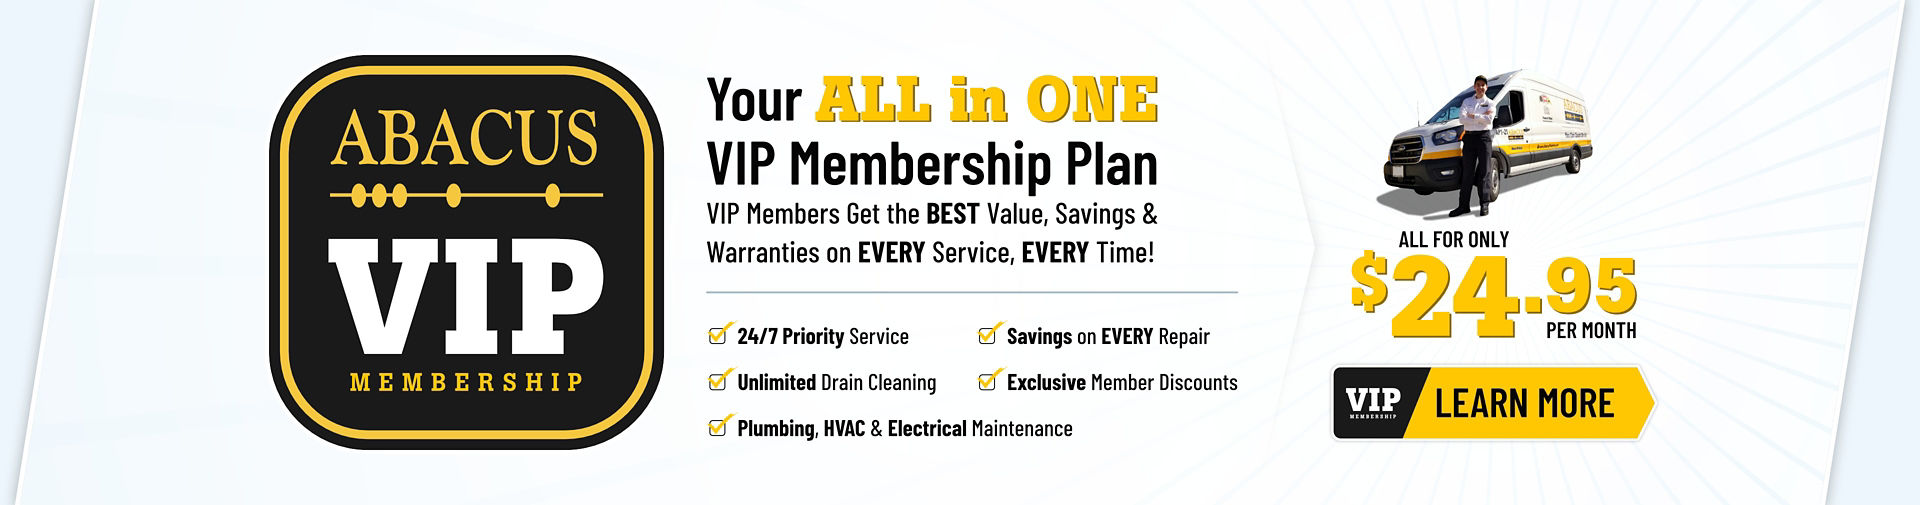 Abacus VIP Membership: Your ALL in ONE Membership Plan. Click here to Learn more